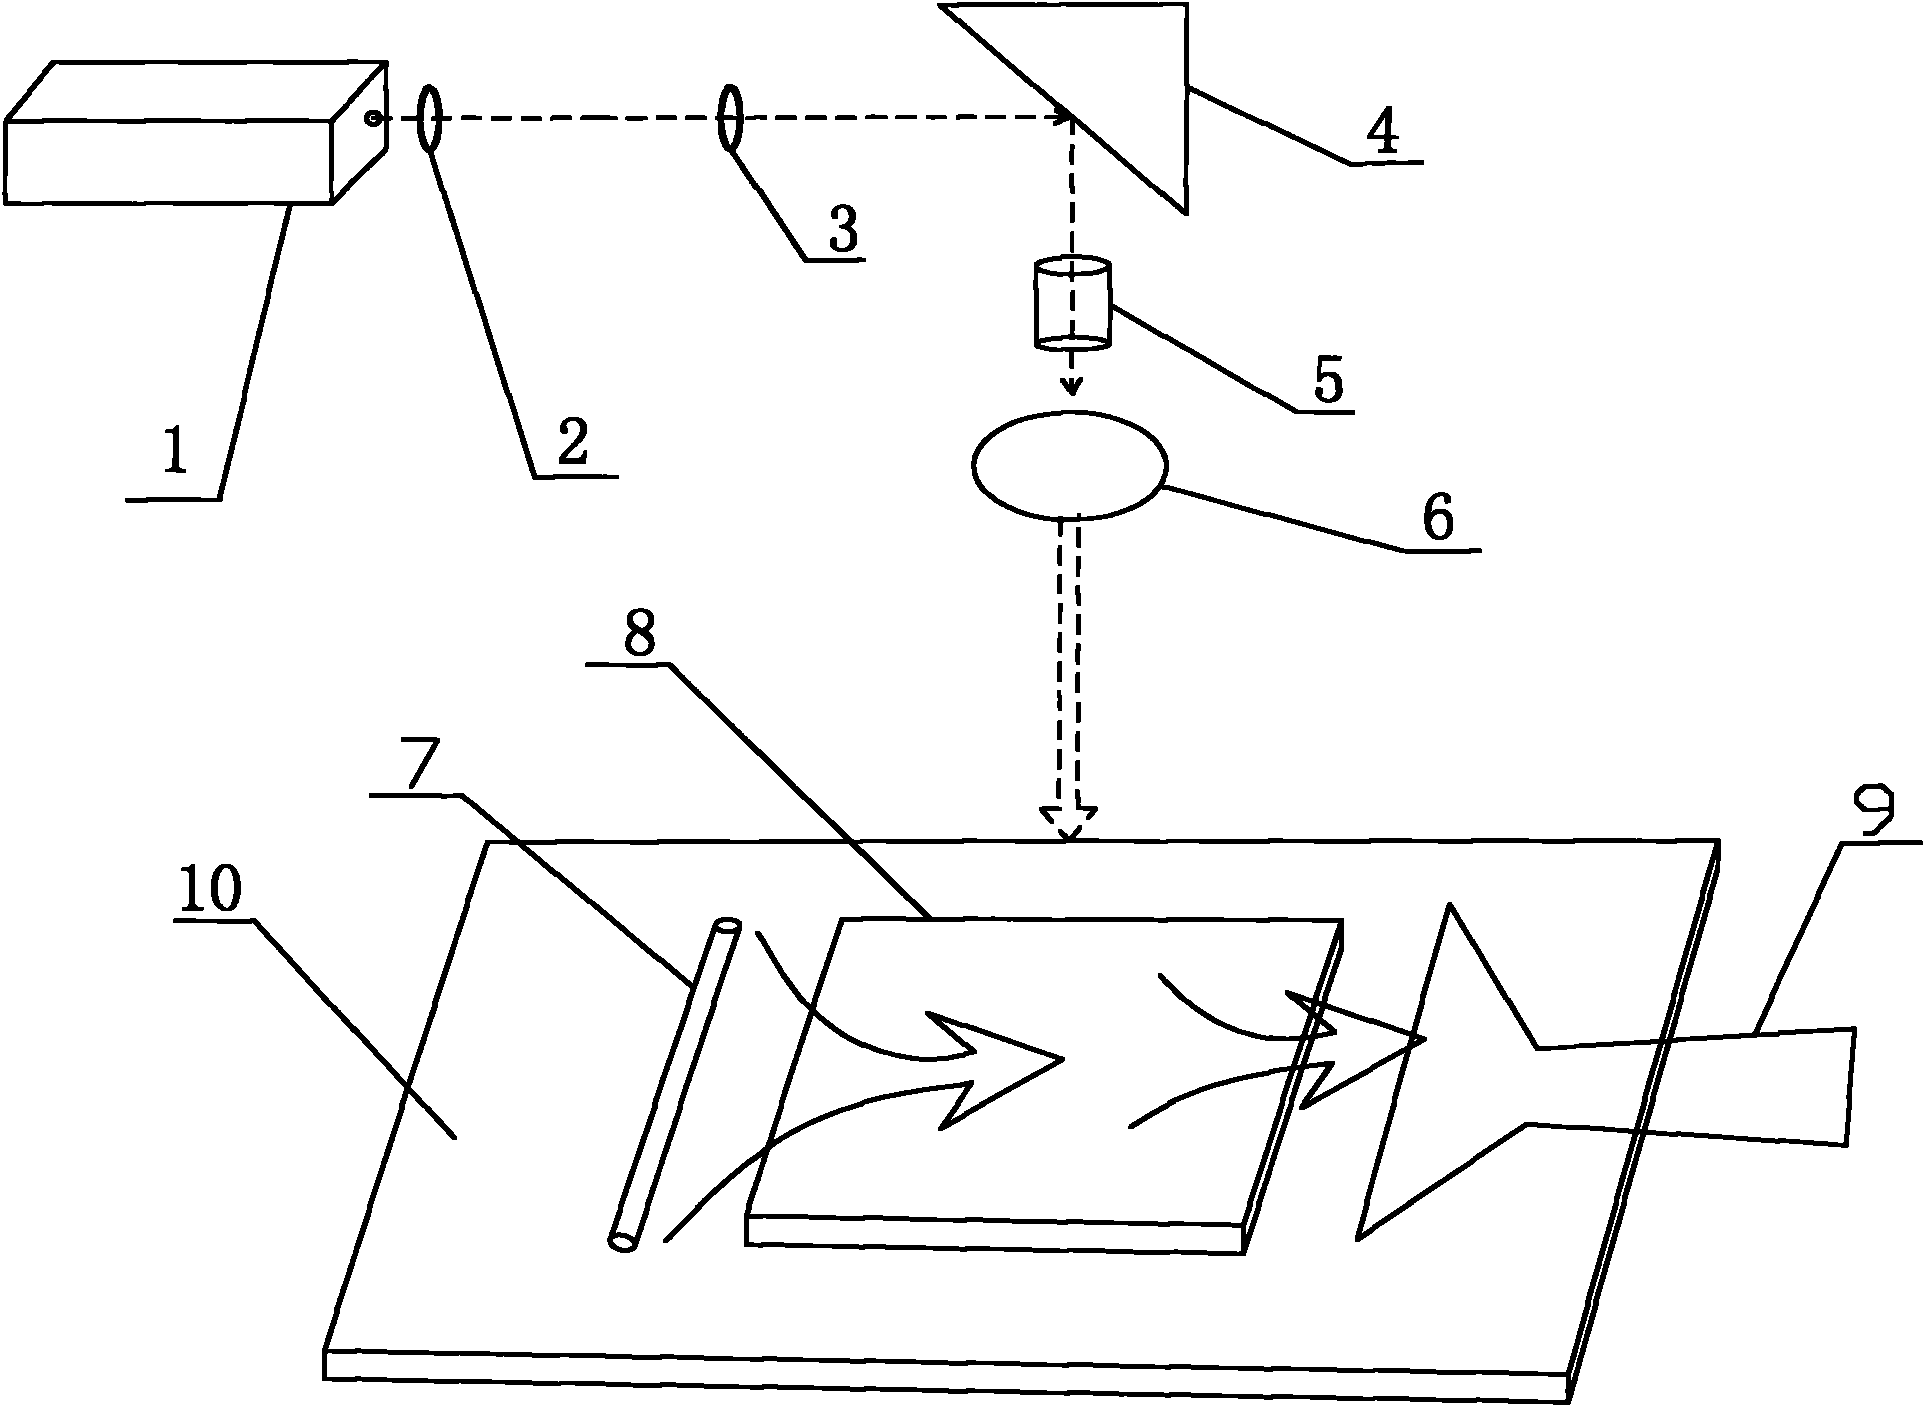 Device and method for etching conductive film of unviewable zone on touch screen